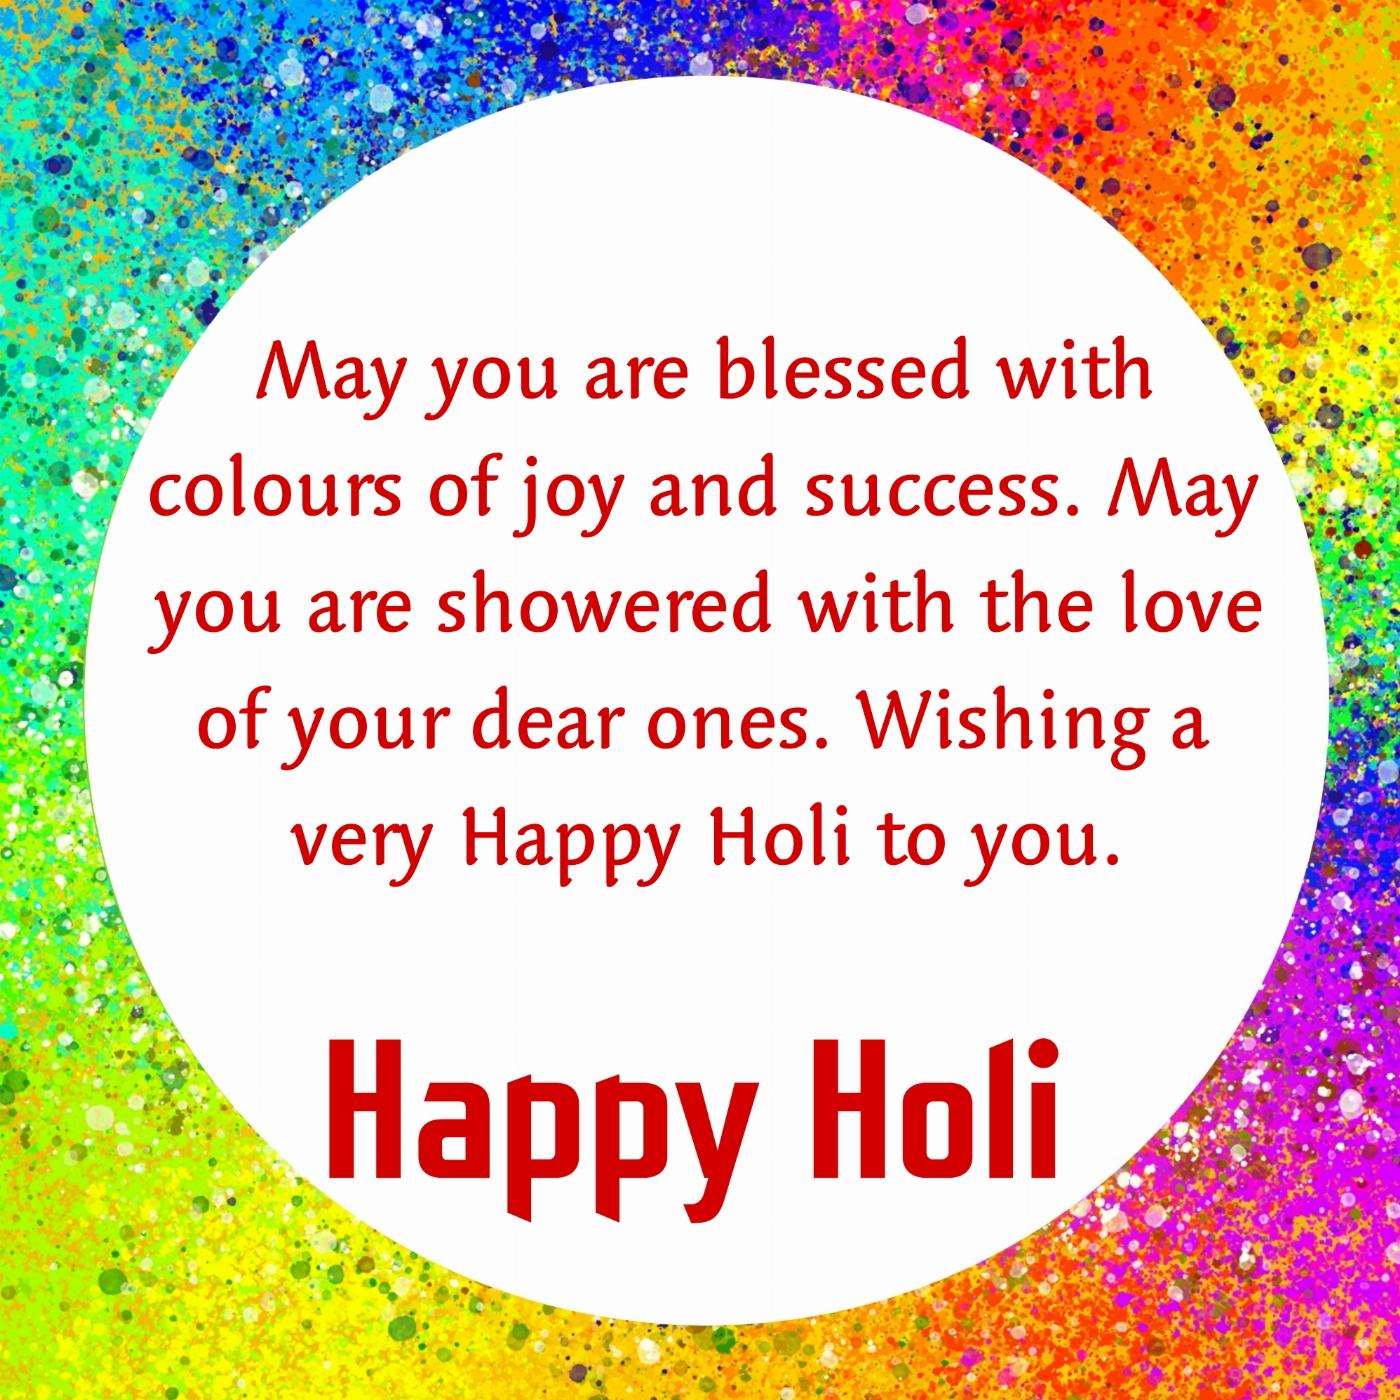 May you are blessed with colours of joy and success